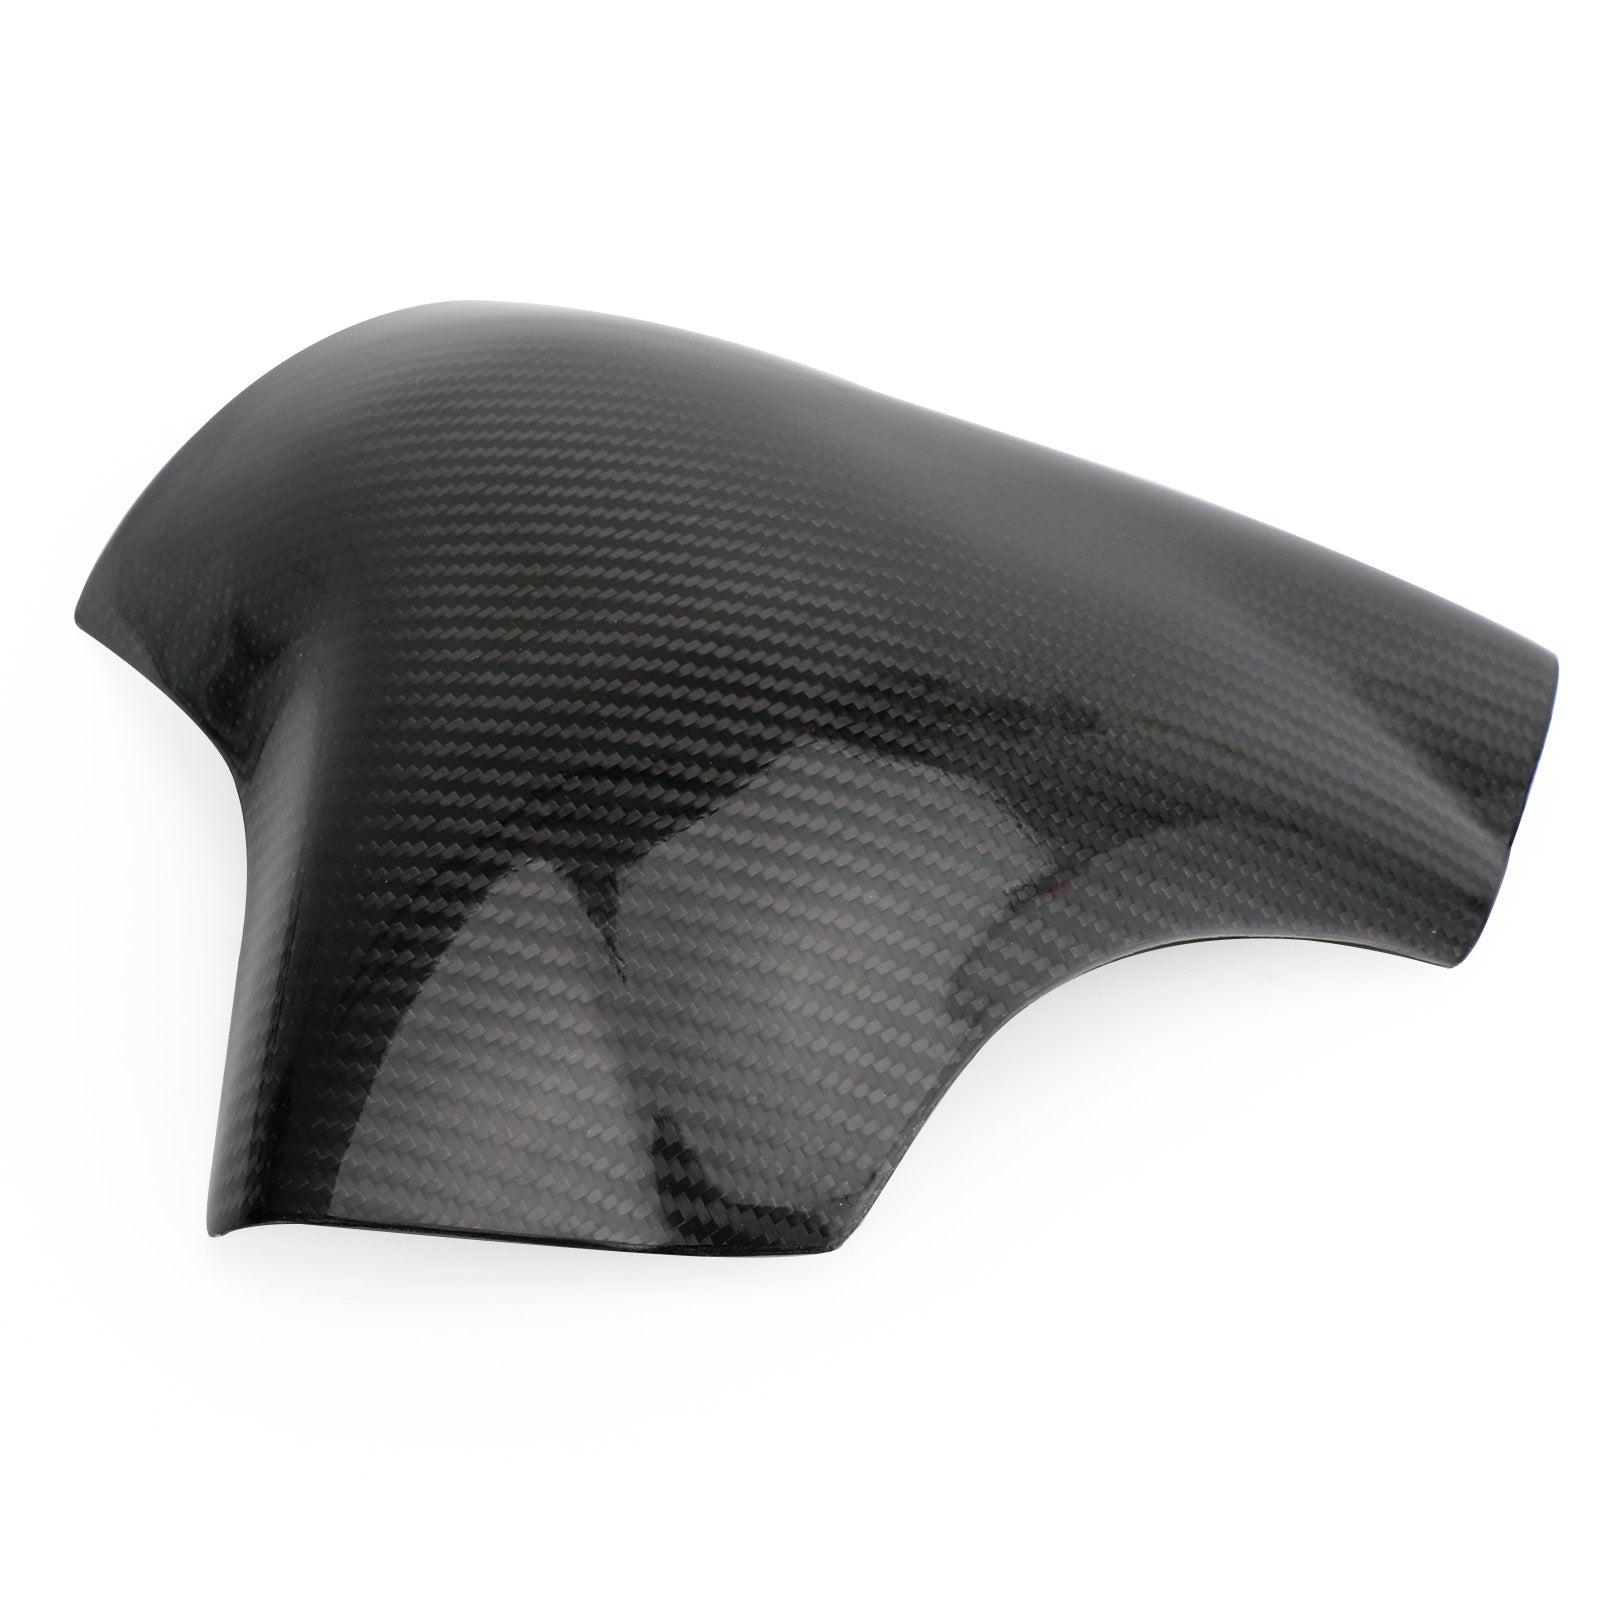 Gas Tank Cover Panel Fairing Protector For Yamaha YZF-R1 2004-2006 Carbon